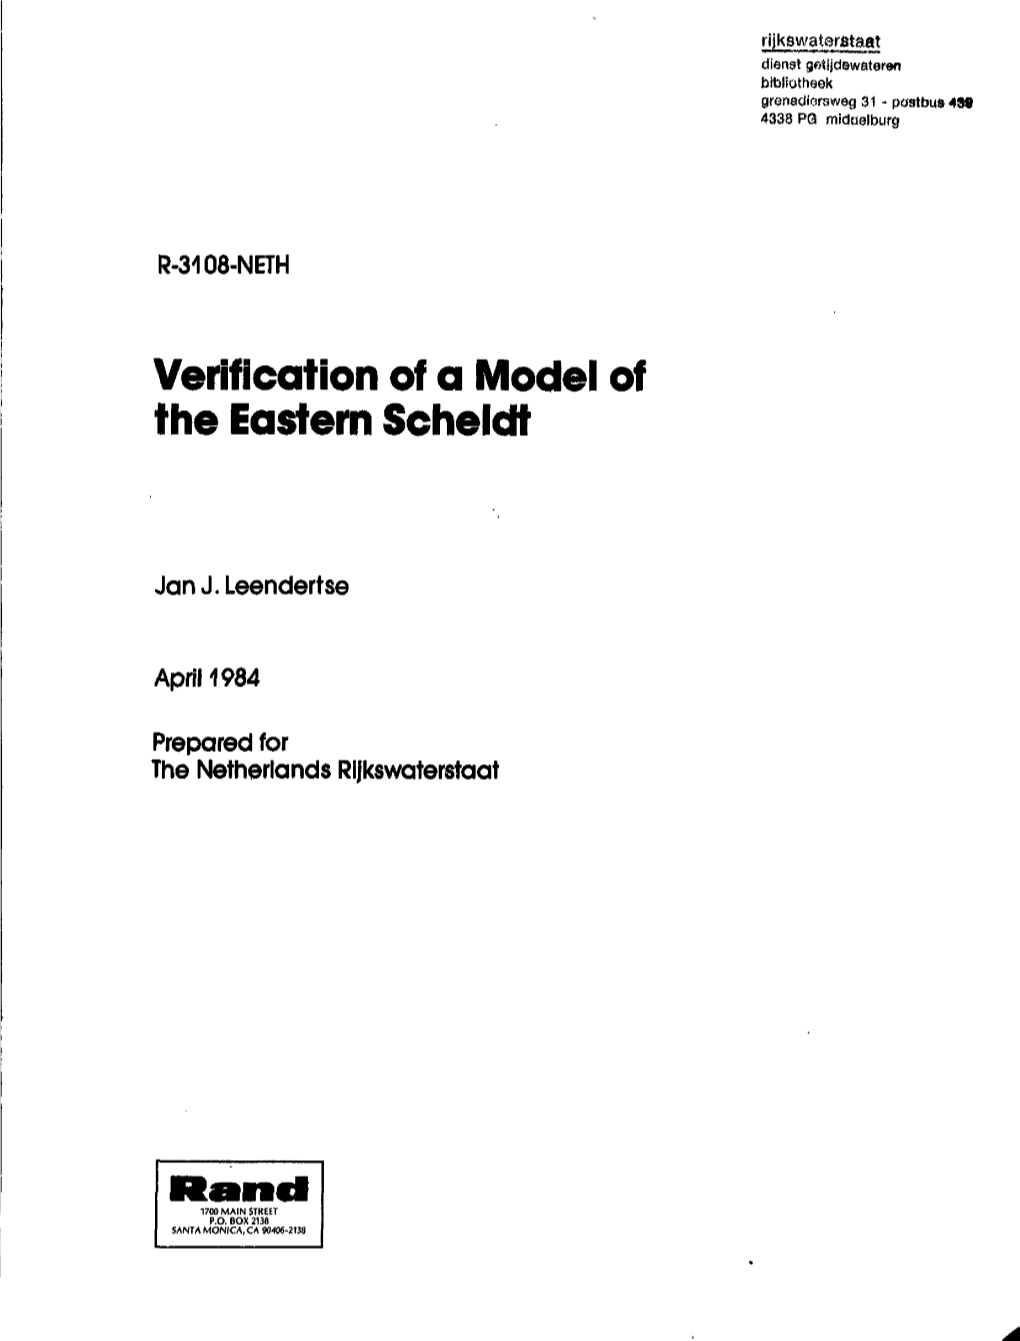 Verification of a Model of the Eastern Scheldt